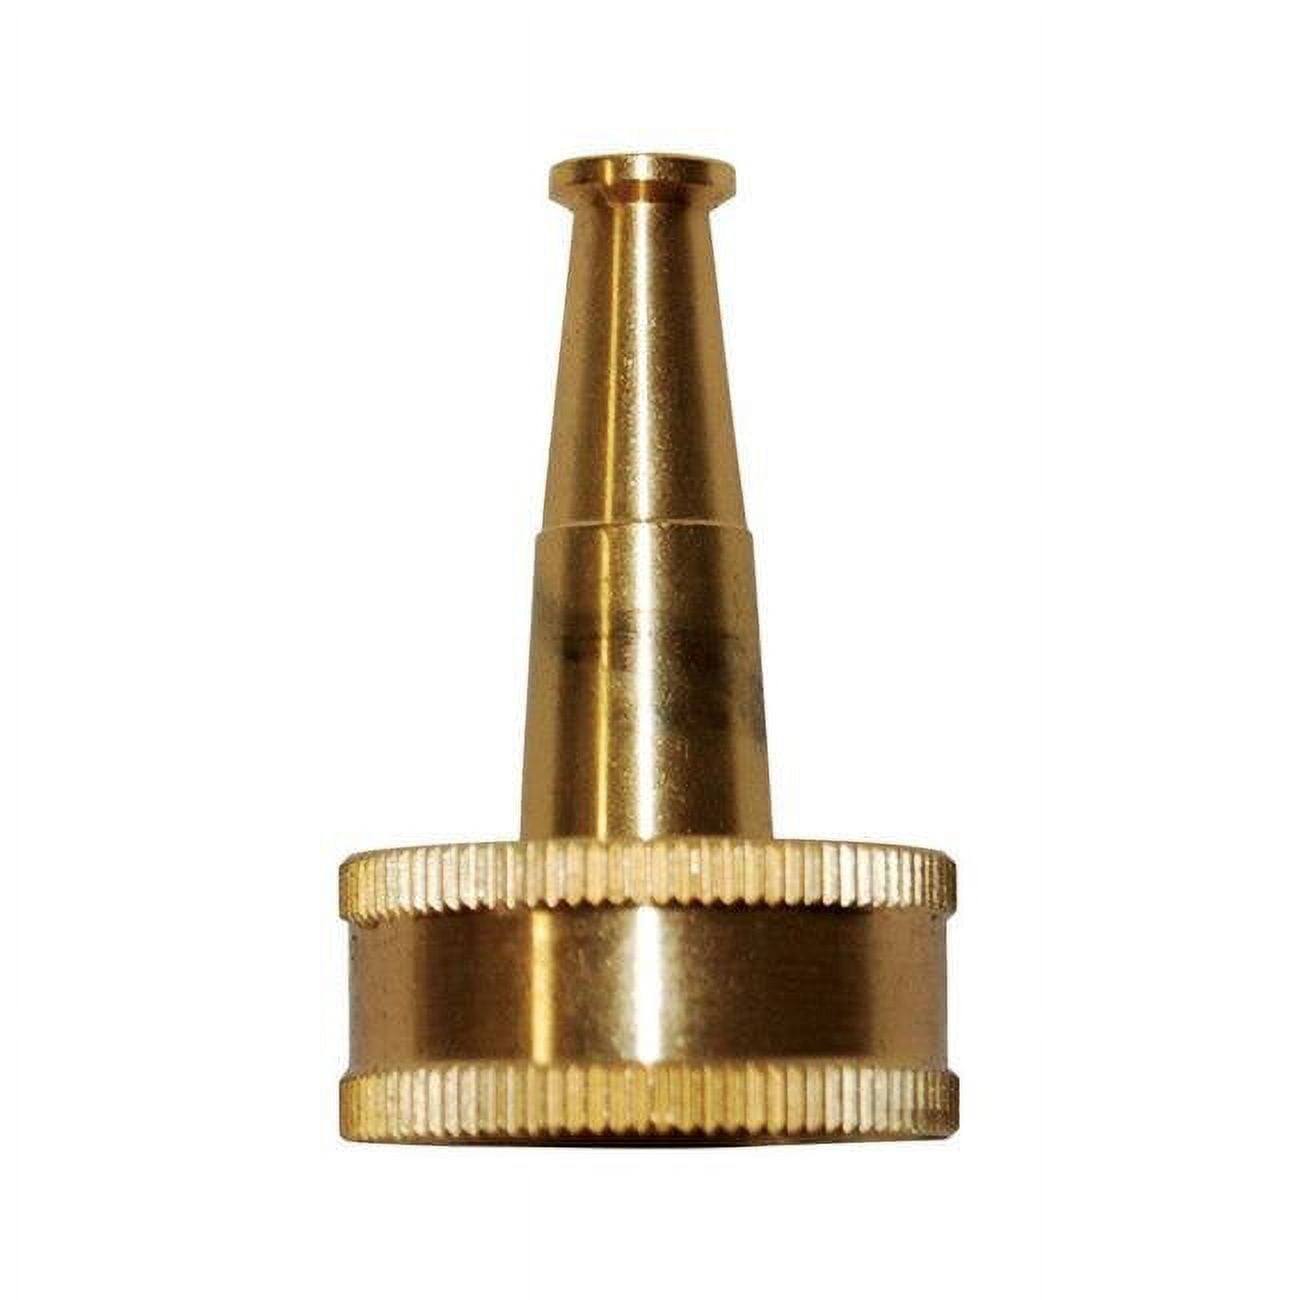 Picture of Rugg 7690951 1 Pattern High Pressure Brass Hose Nozzle - Pack of 12